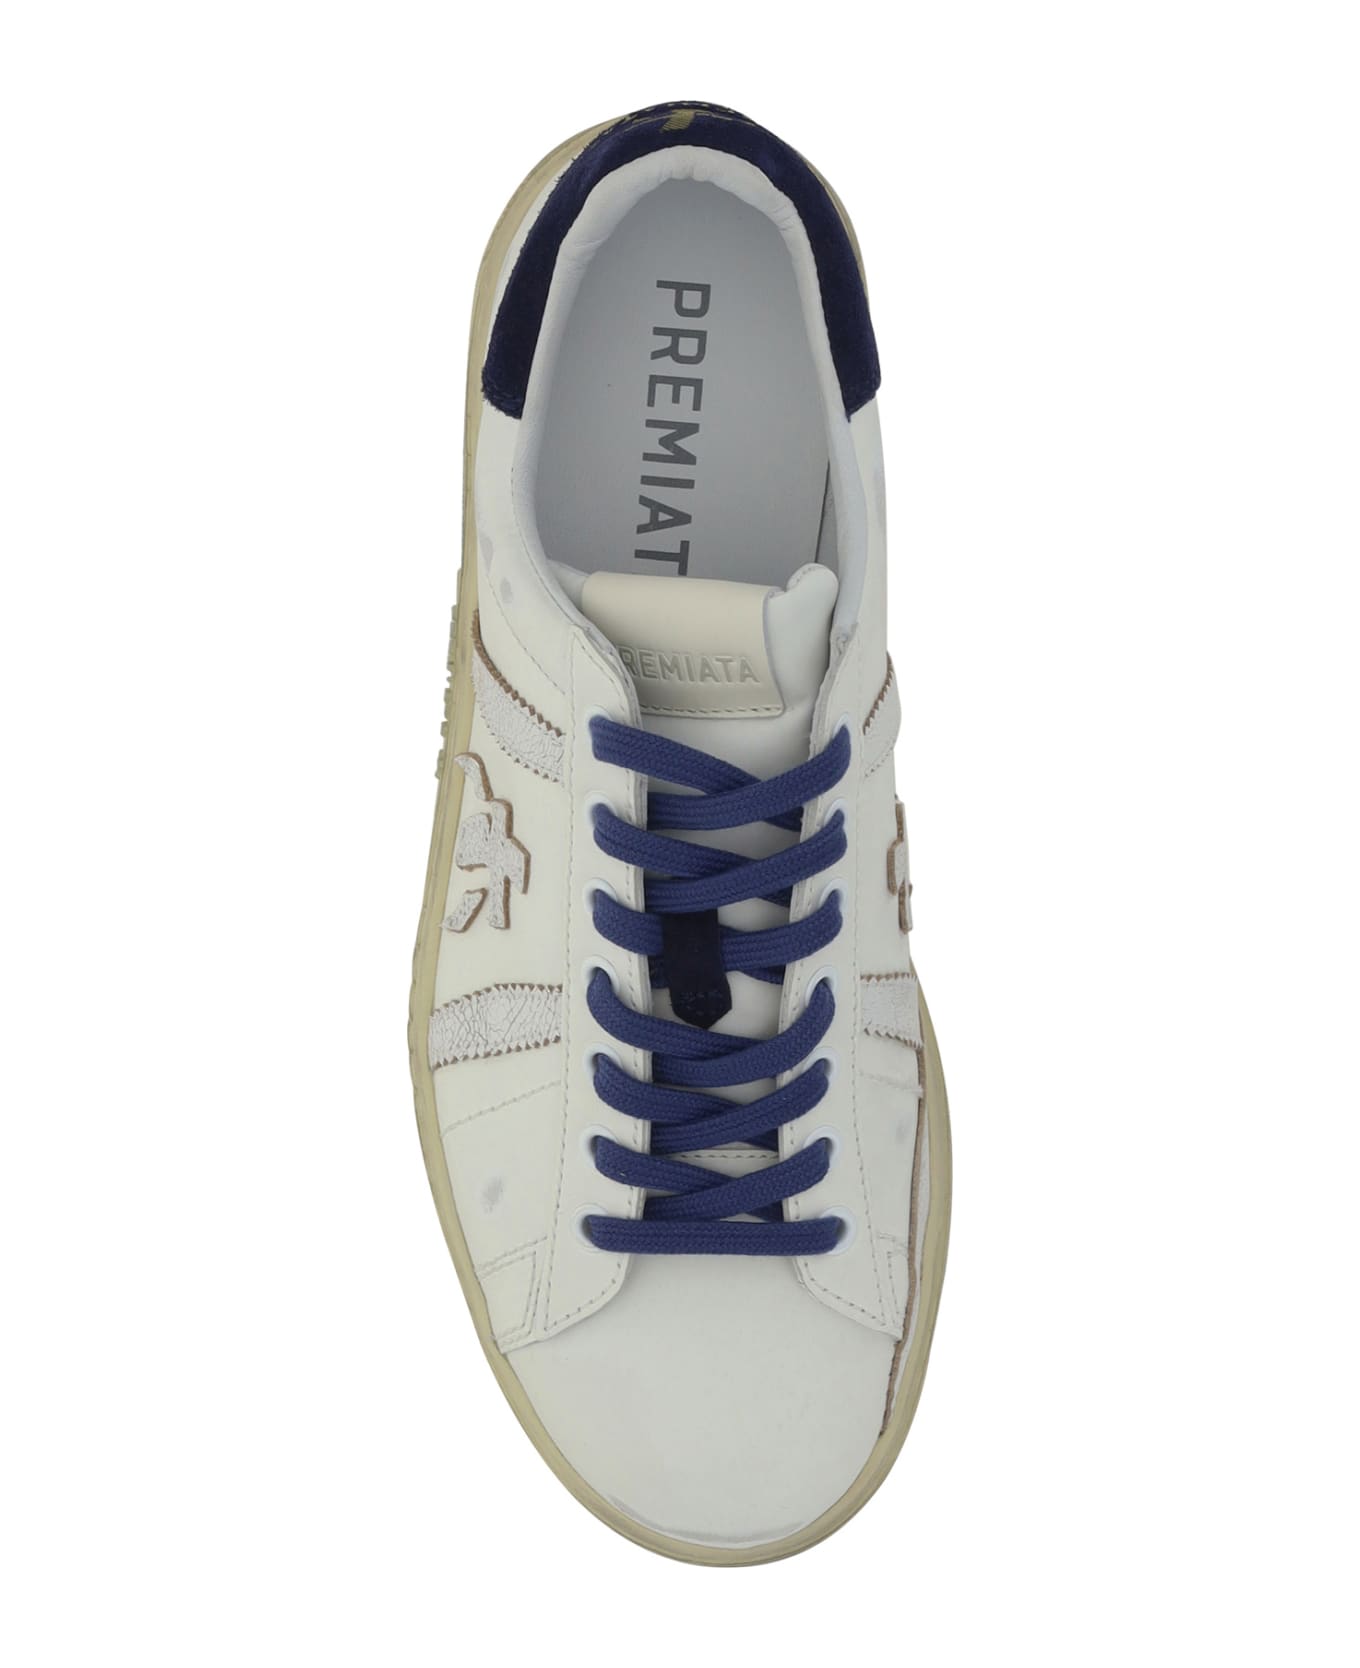 Premiata Russell Sneakers - Off White